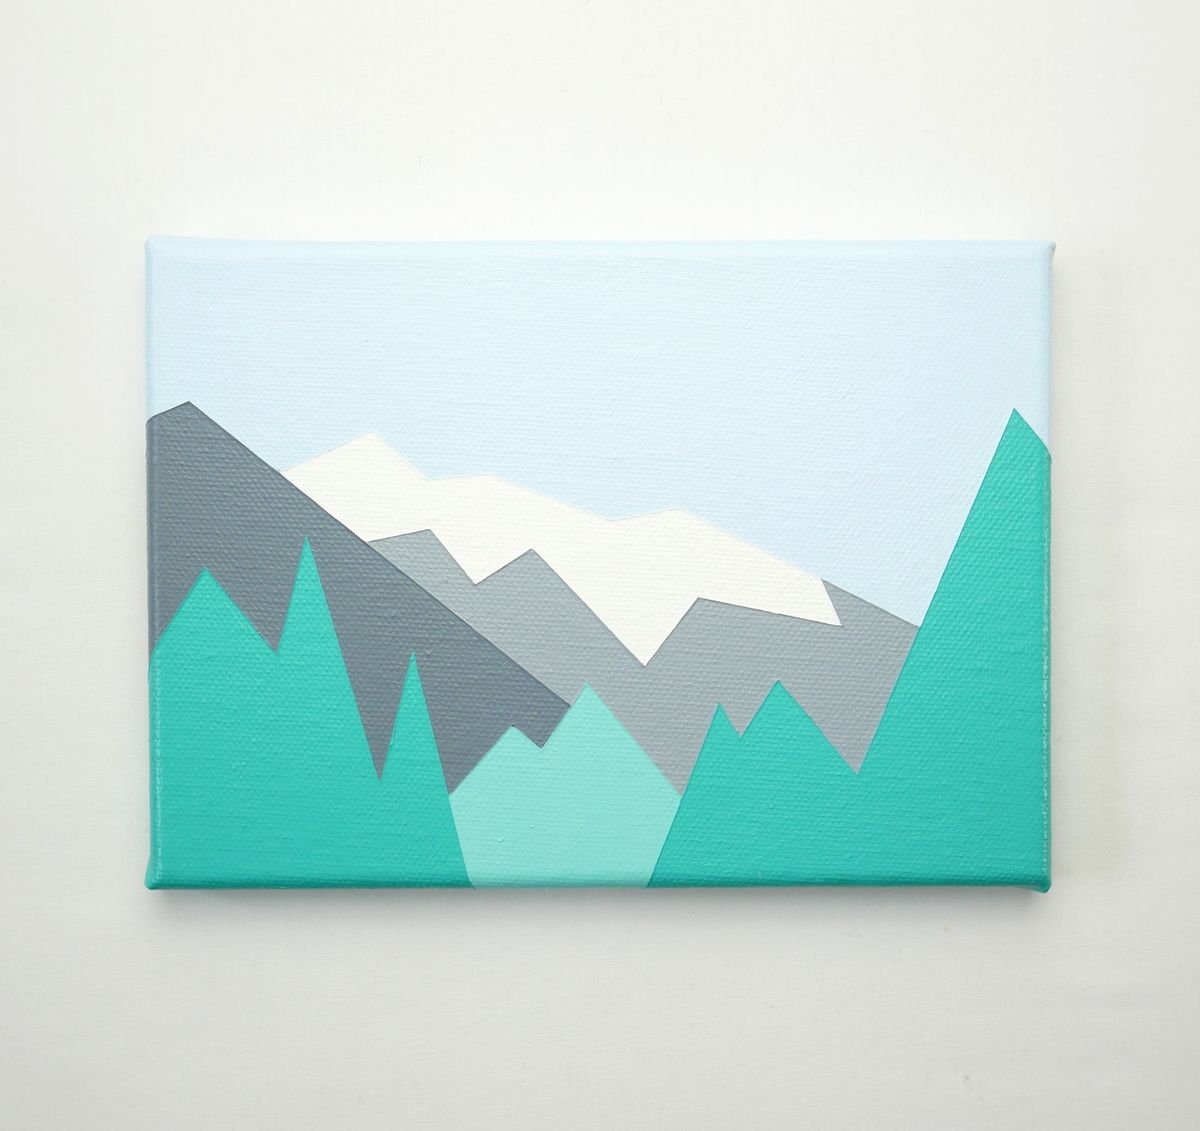 Chatel Minimal mountain landscape painting by Zoe Hattersley